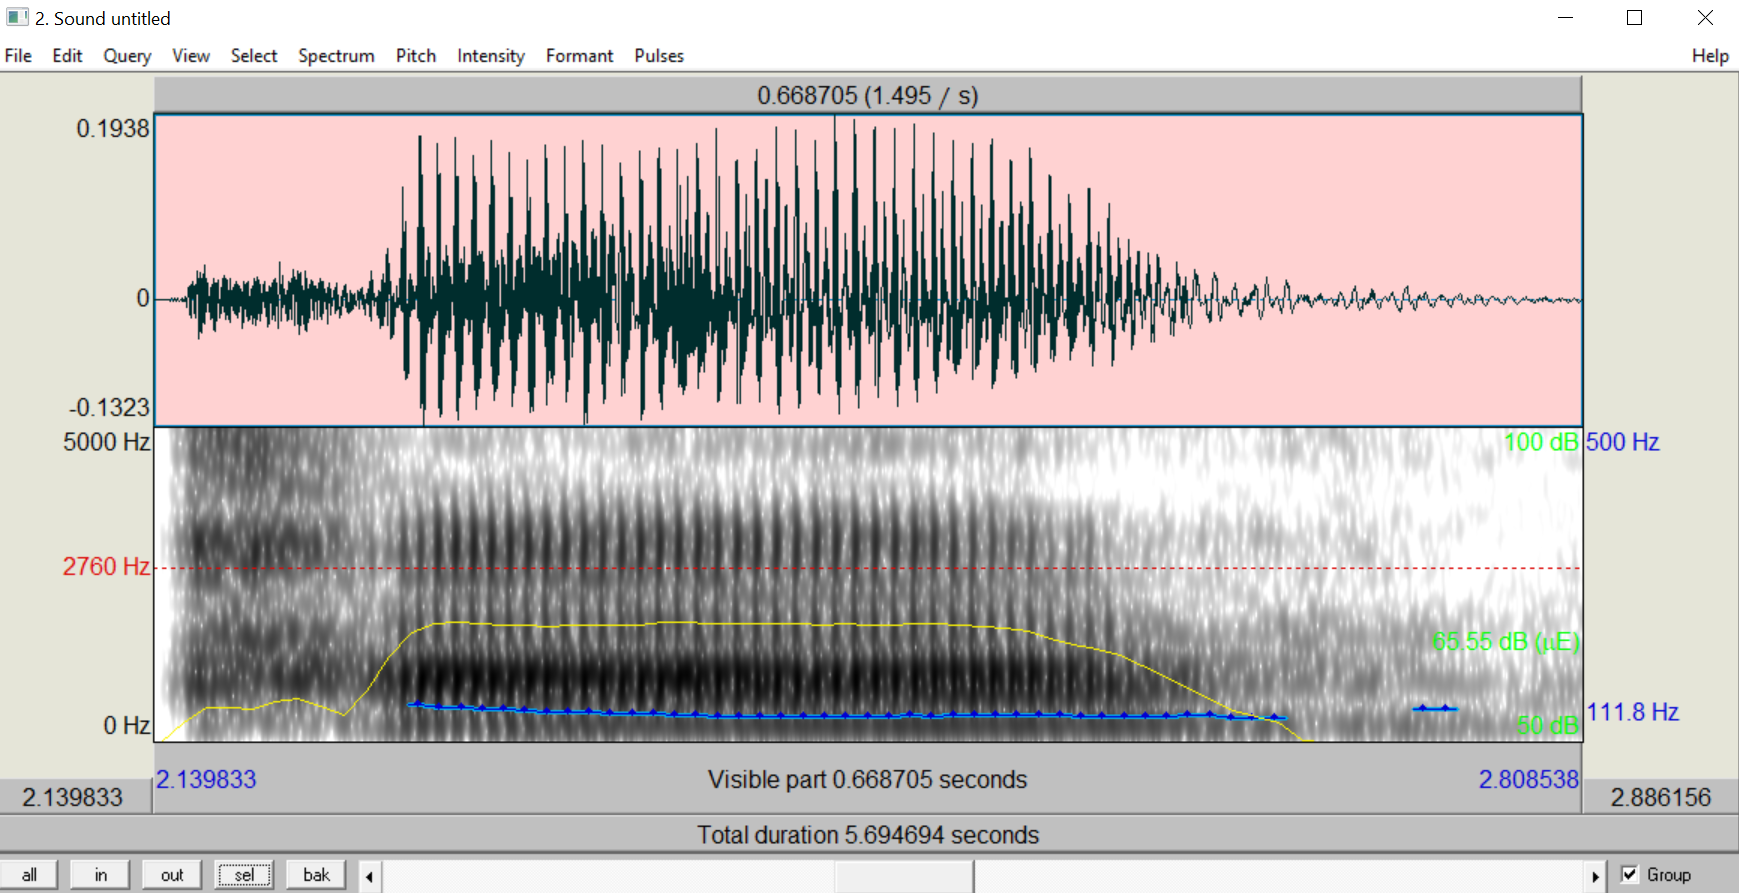 Same as before, but now zoomed in to a single syllable, with waveform and spectrogram visible.